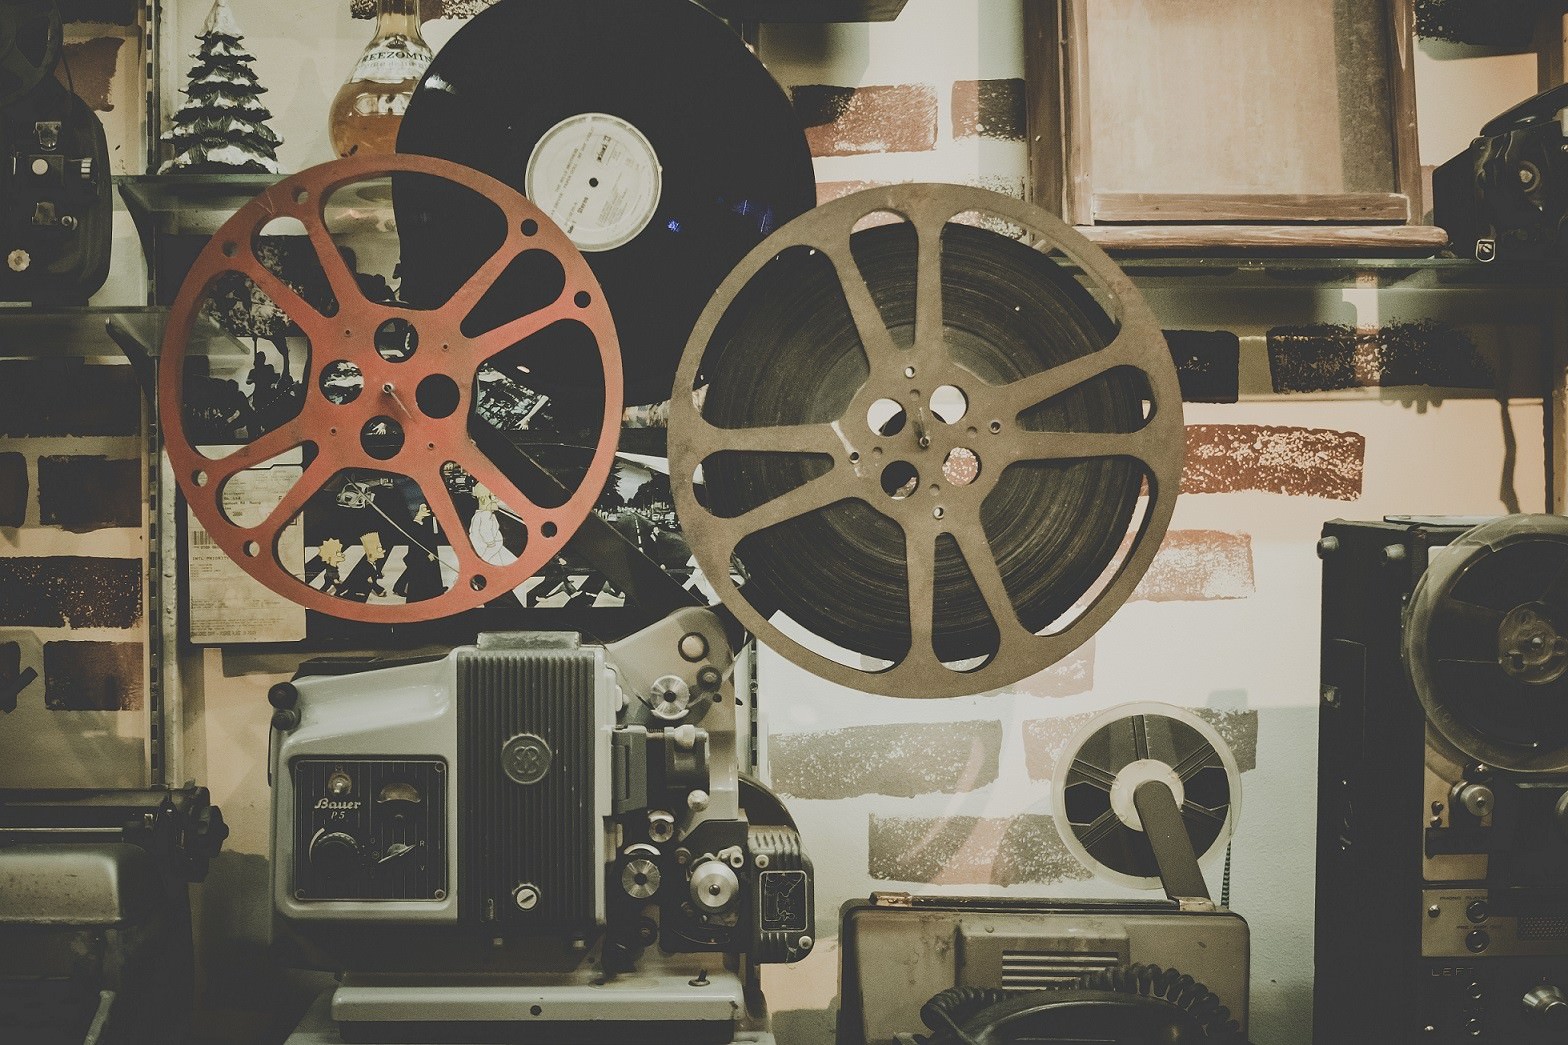 Close-up picture of old reel-to-reel movie projector